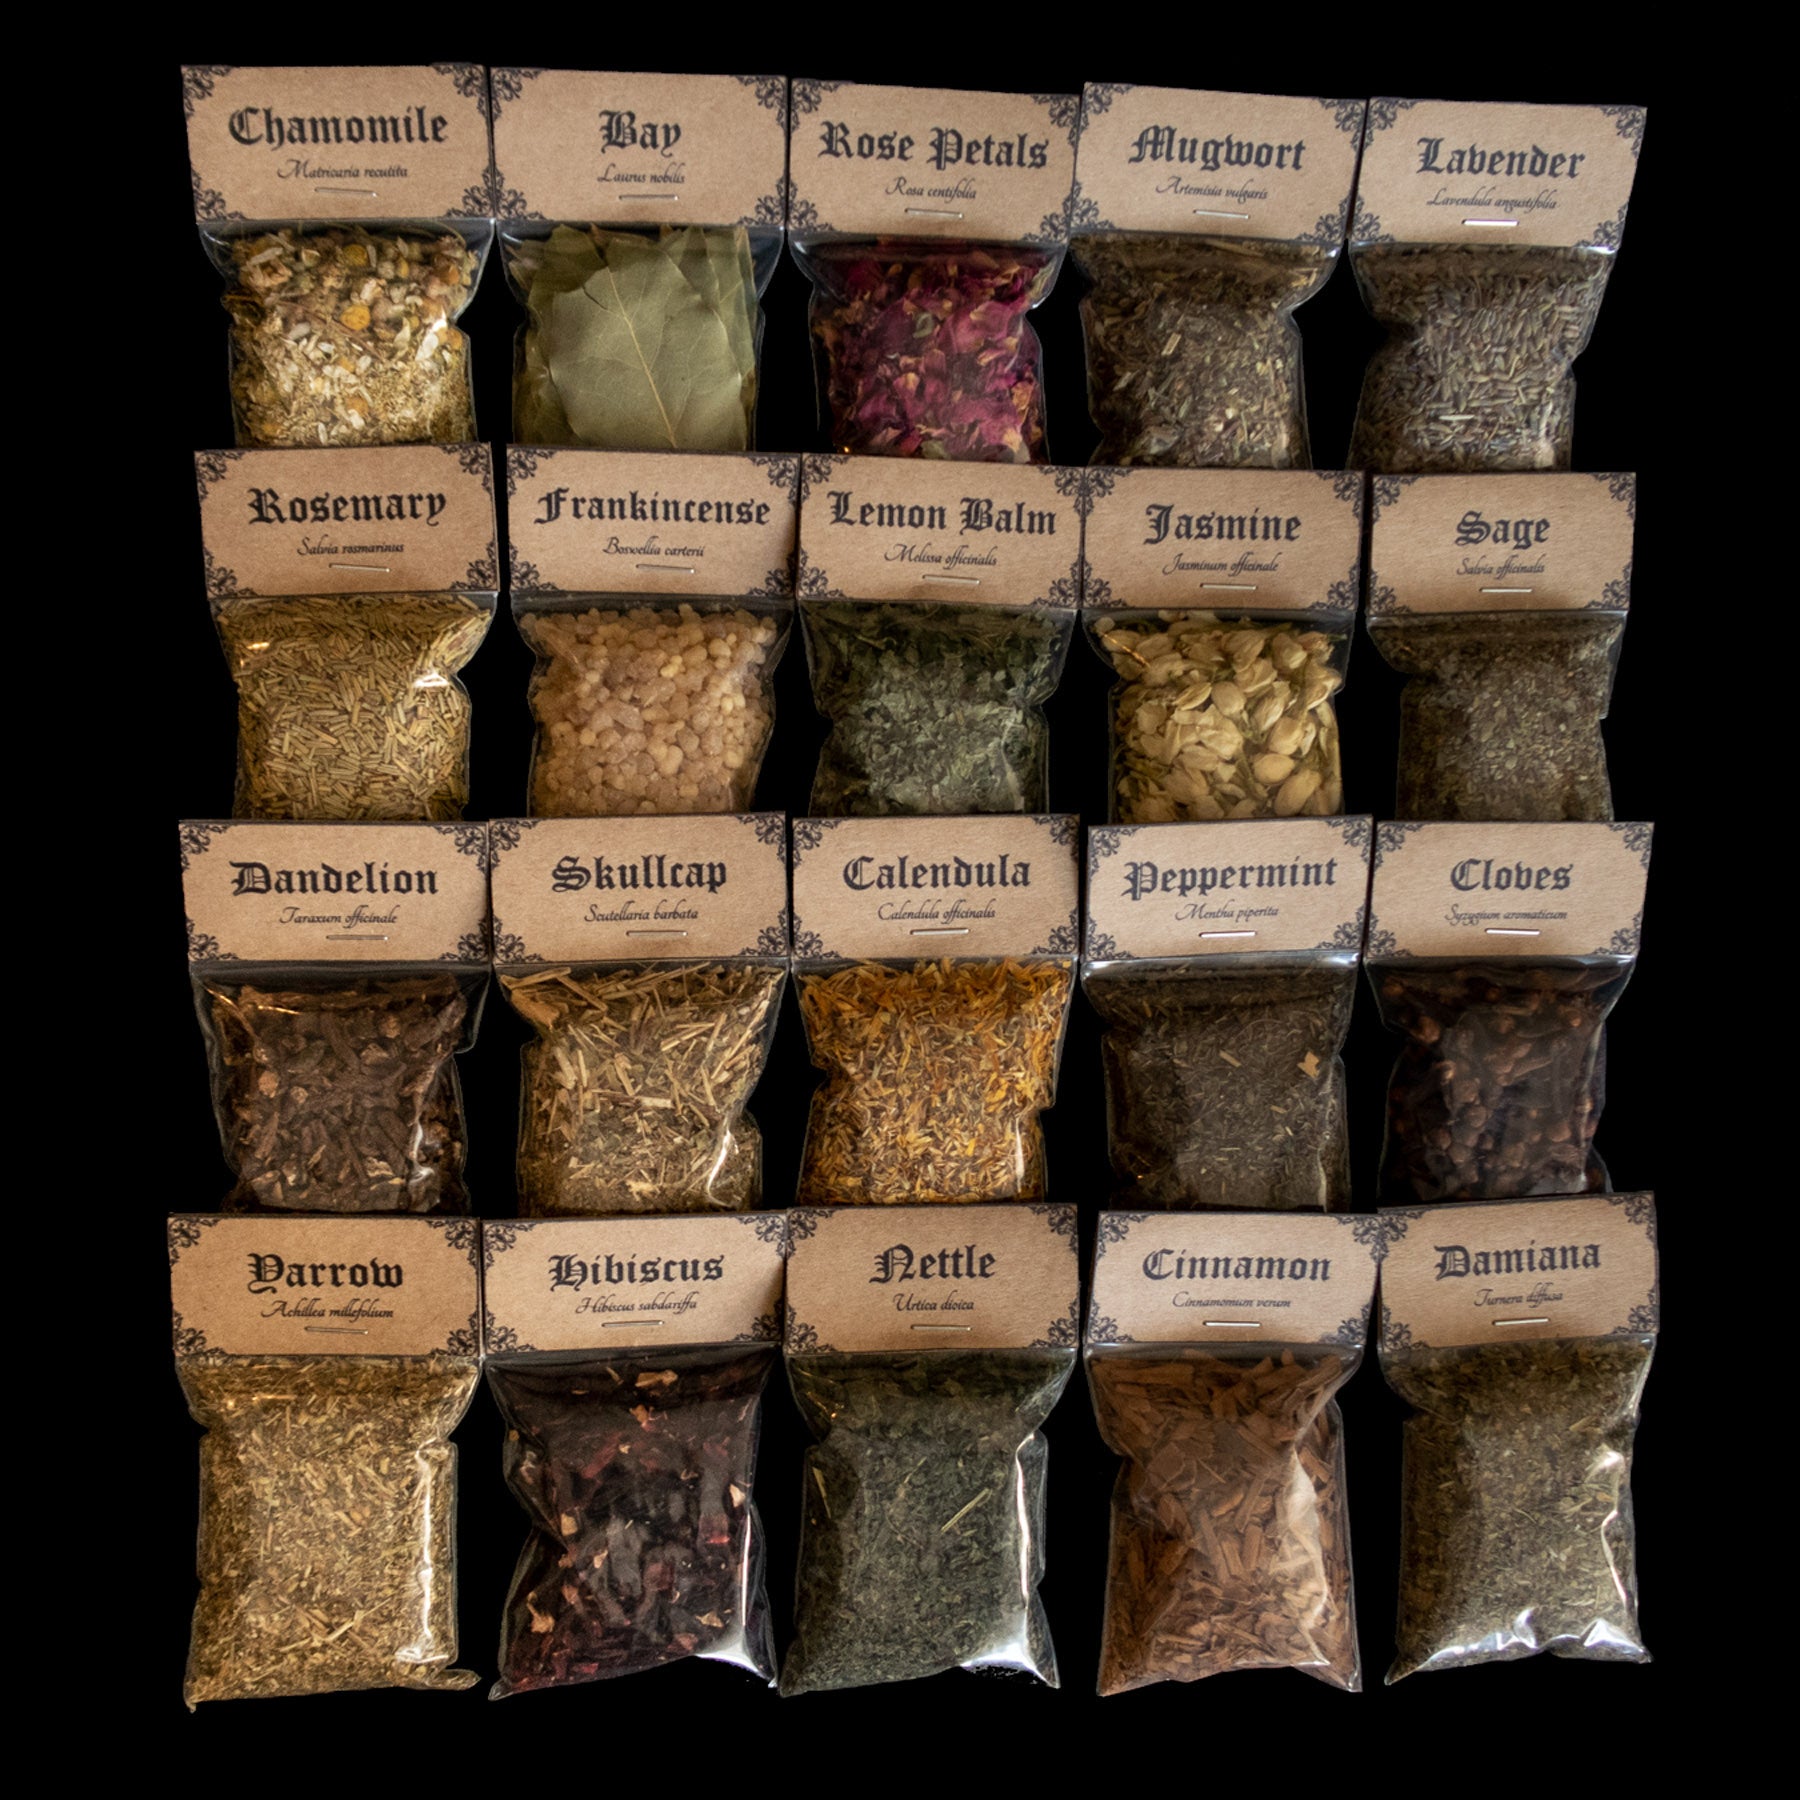 Extended Botanical Favourites kit: A collection of 20 bags of herbs - Victorian-apothecary-style brown labels at the top give the common and Latin names